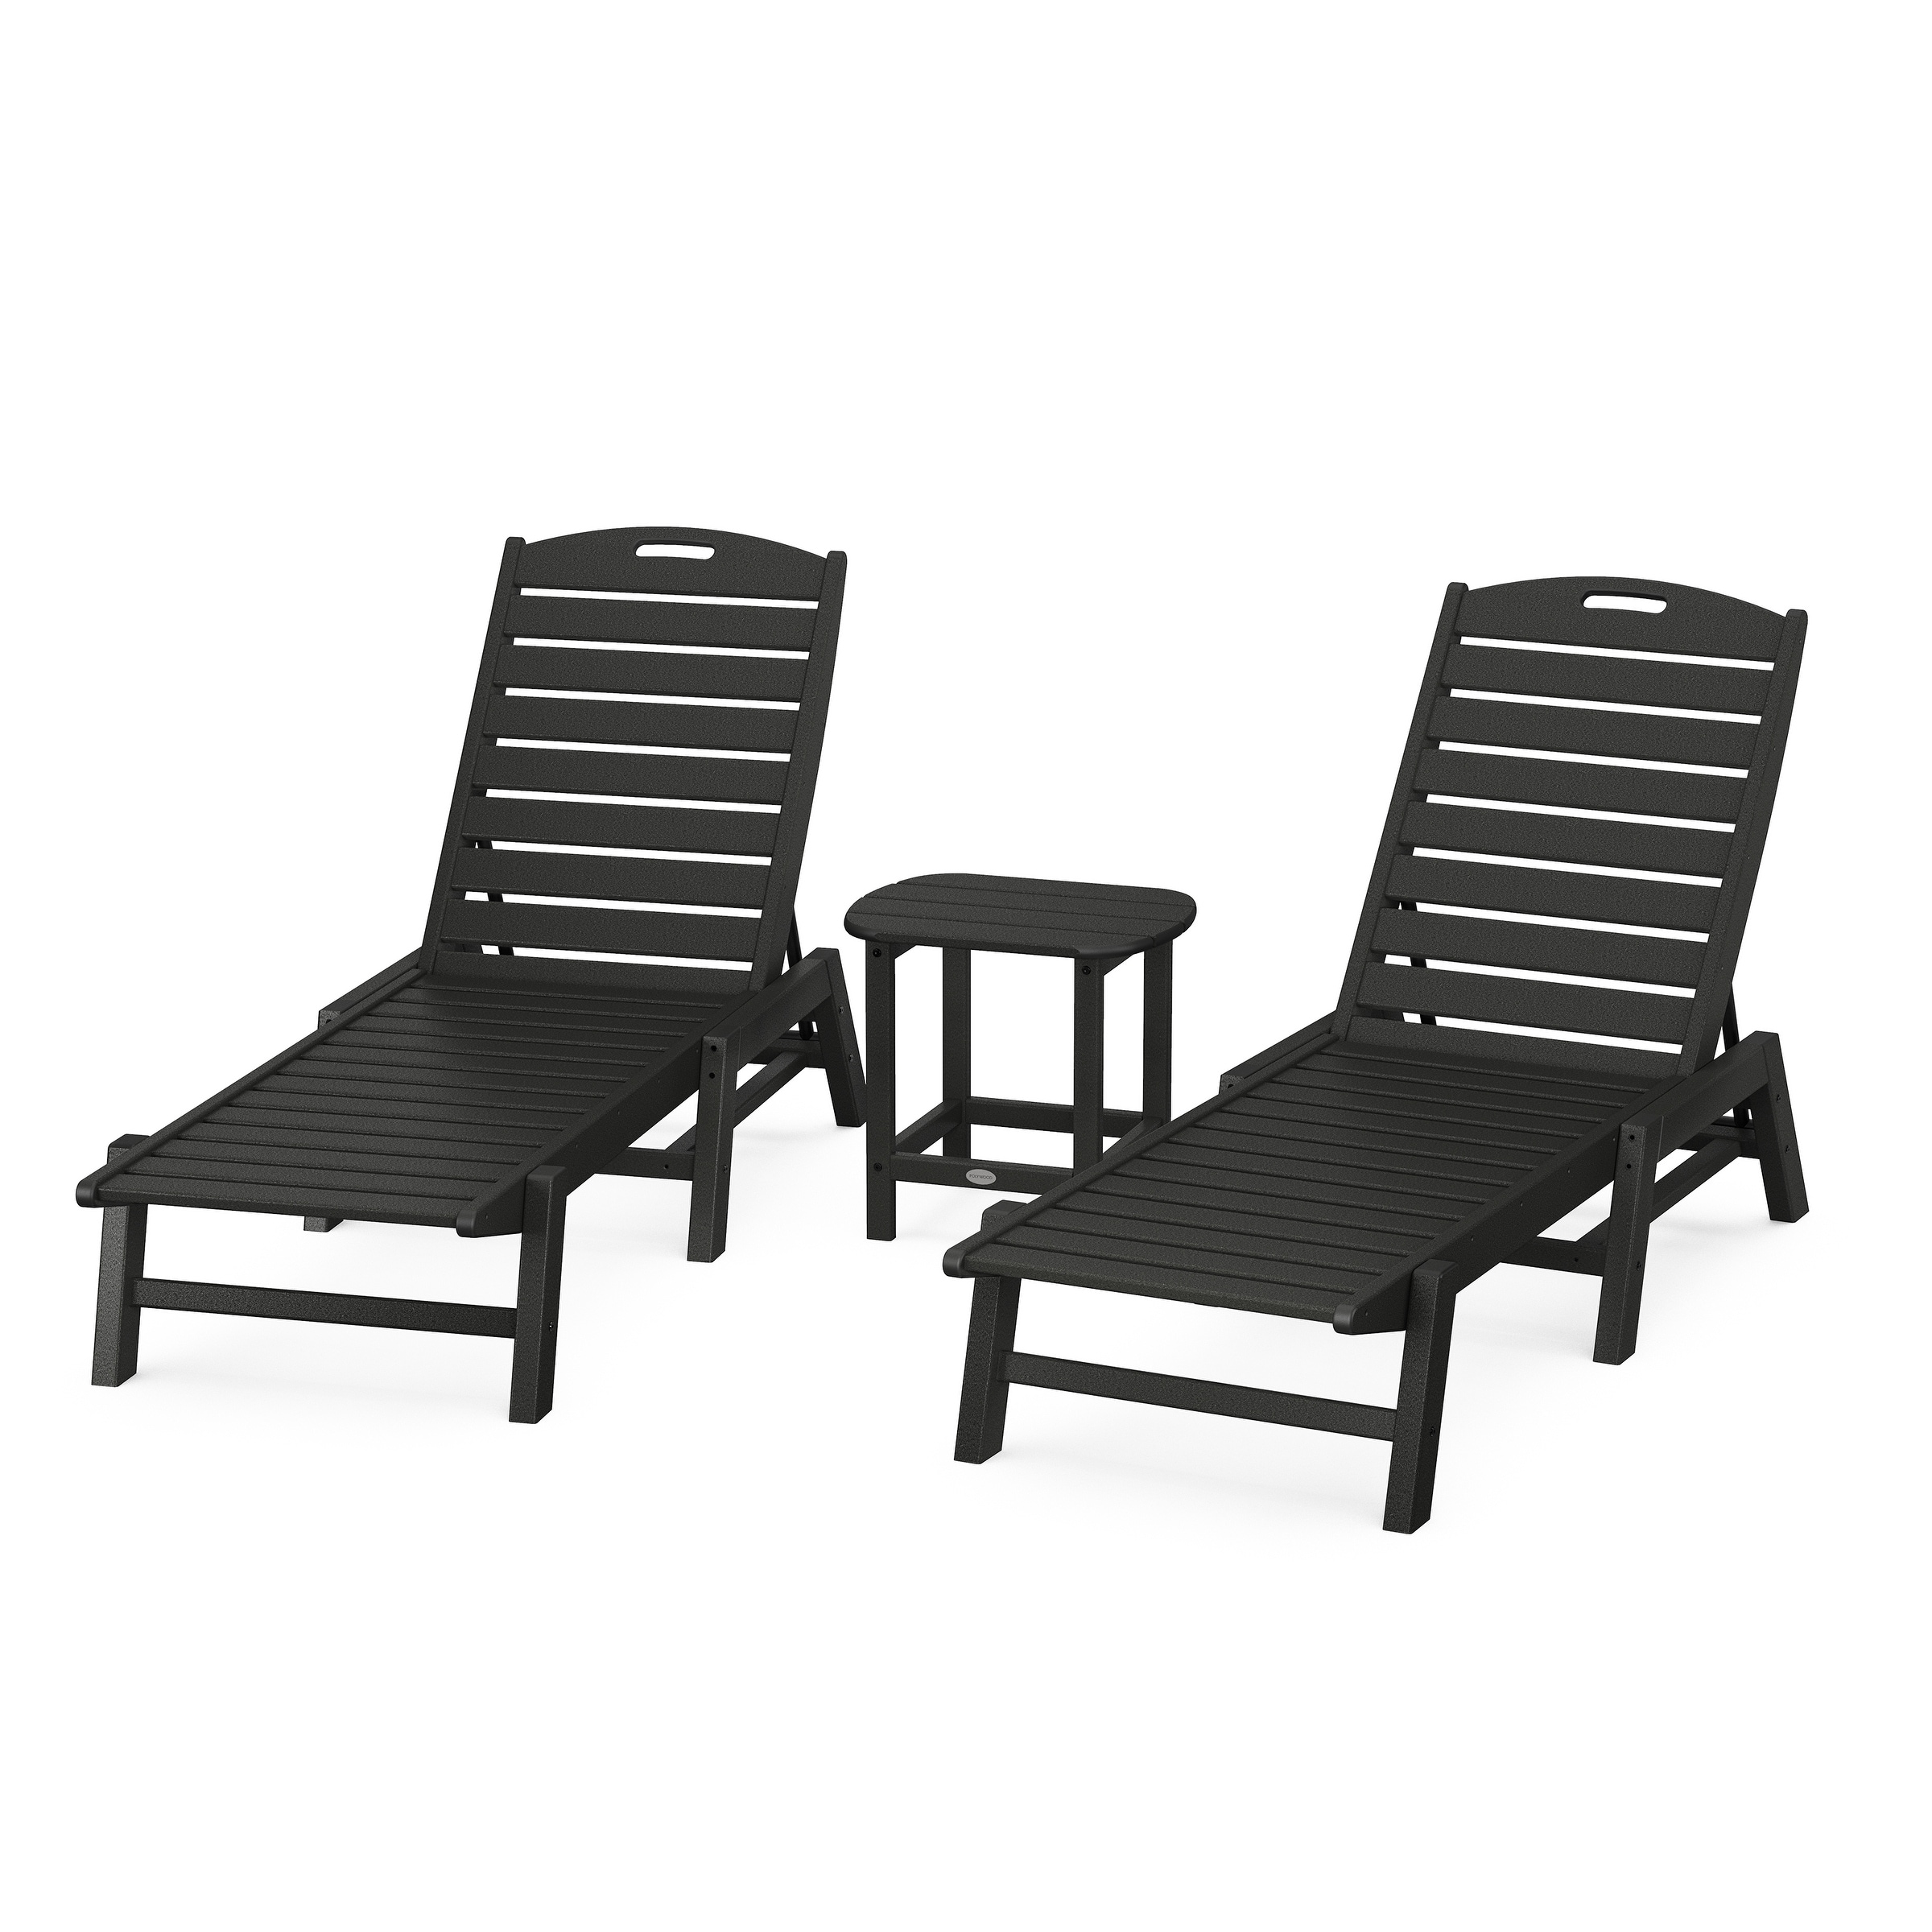 Polywood Nautical 3-piece Chaise Lounge Set With South Beach 18 Side Table - N/a